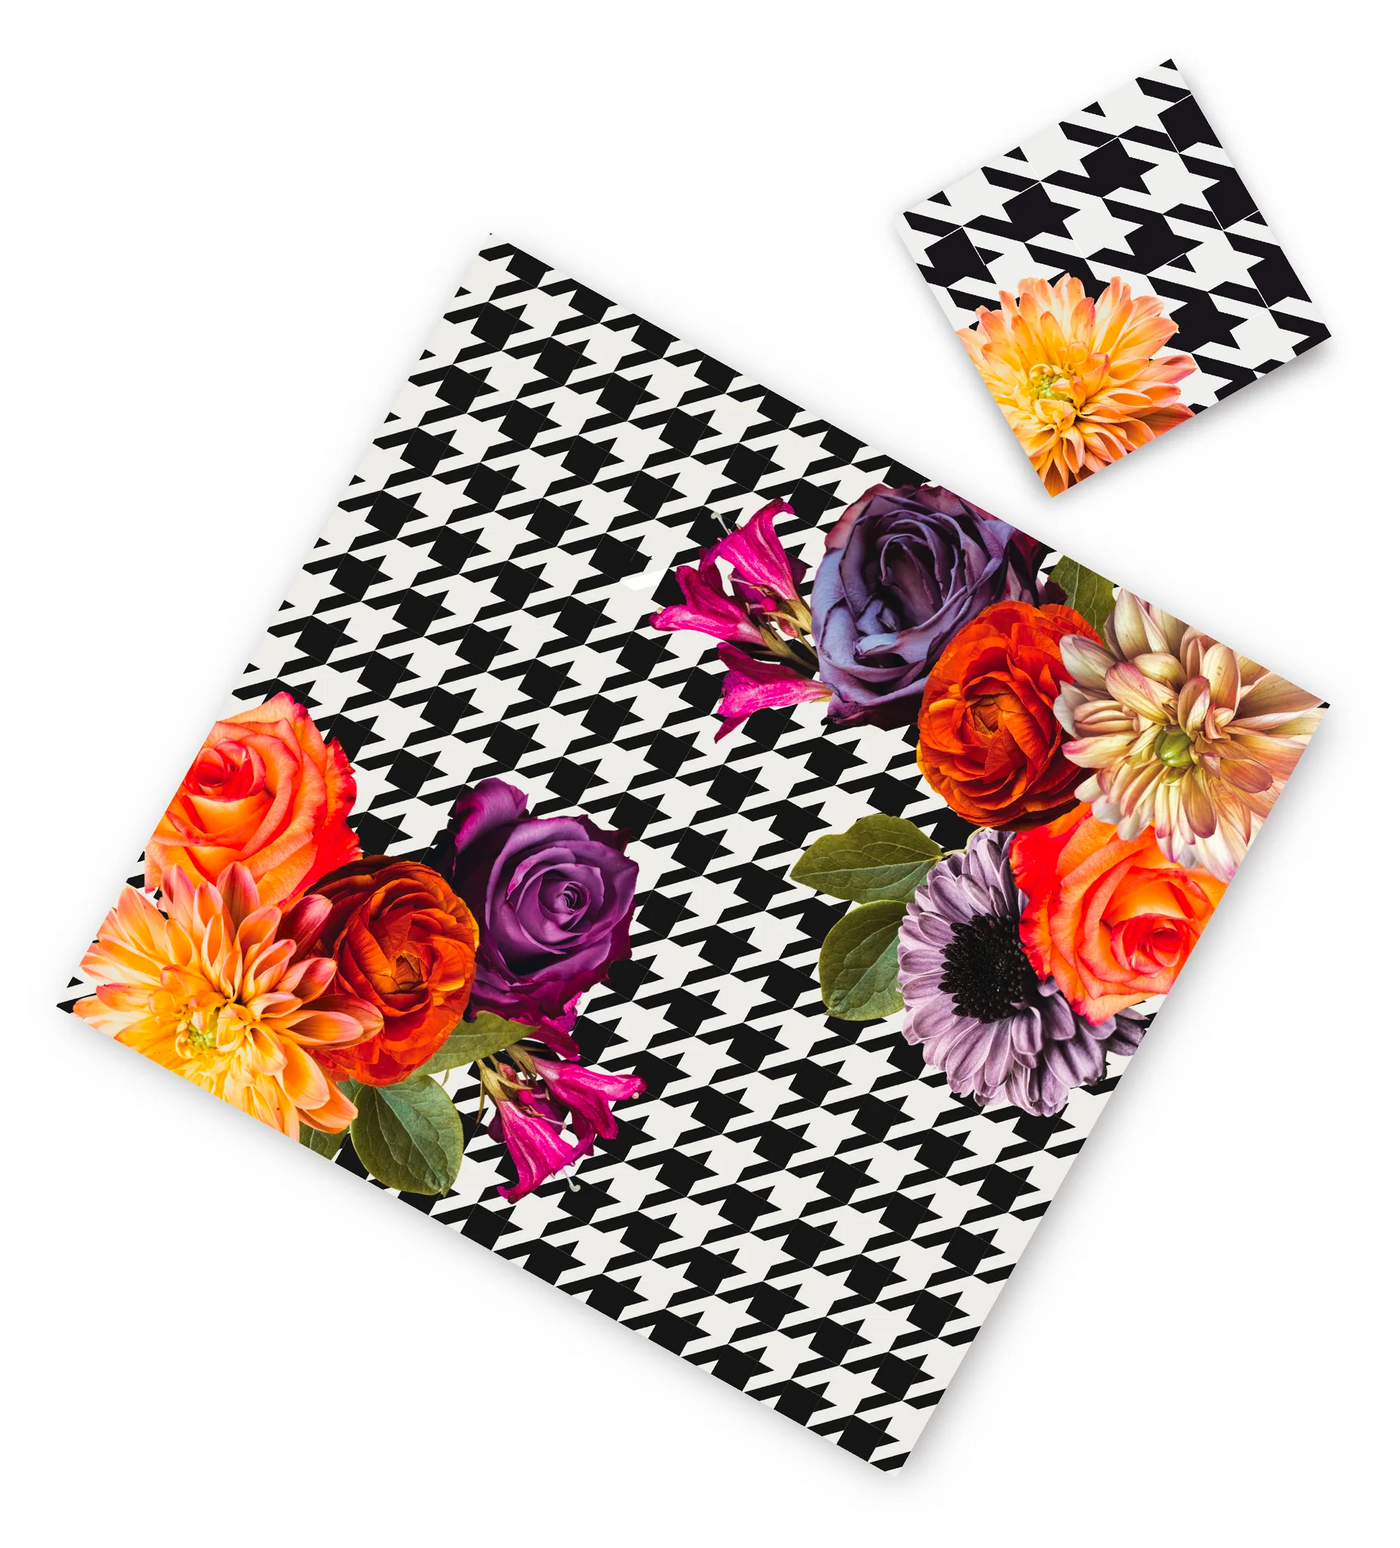 Houndstooth With Flowers Paper Placemat With Coasters (12 Count) - Set With Style